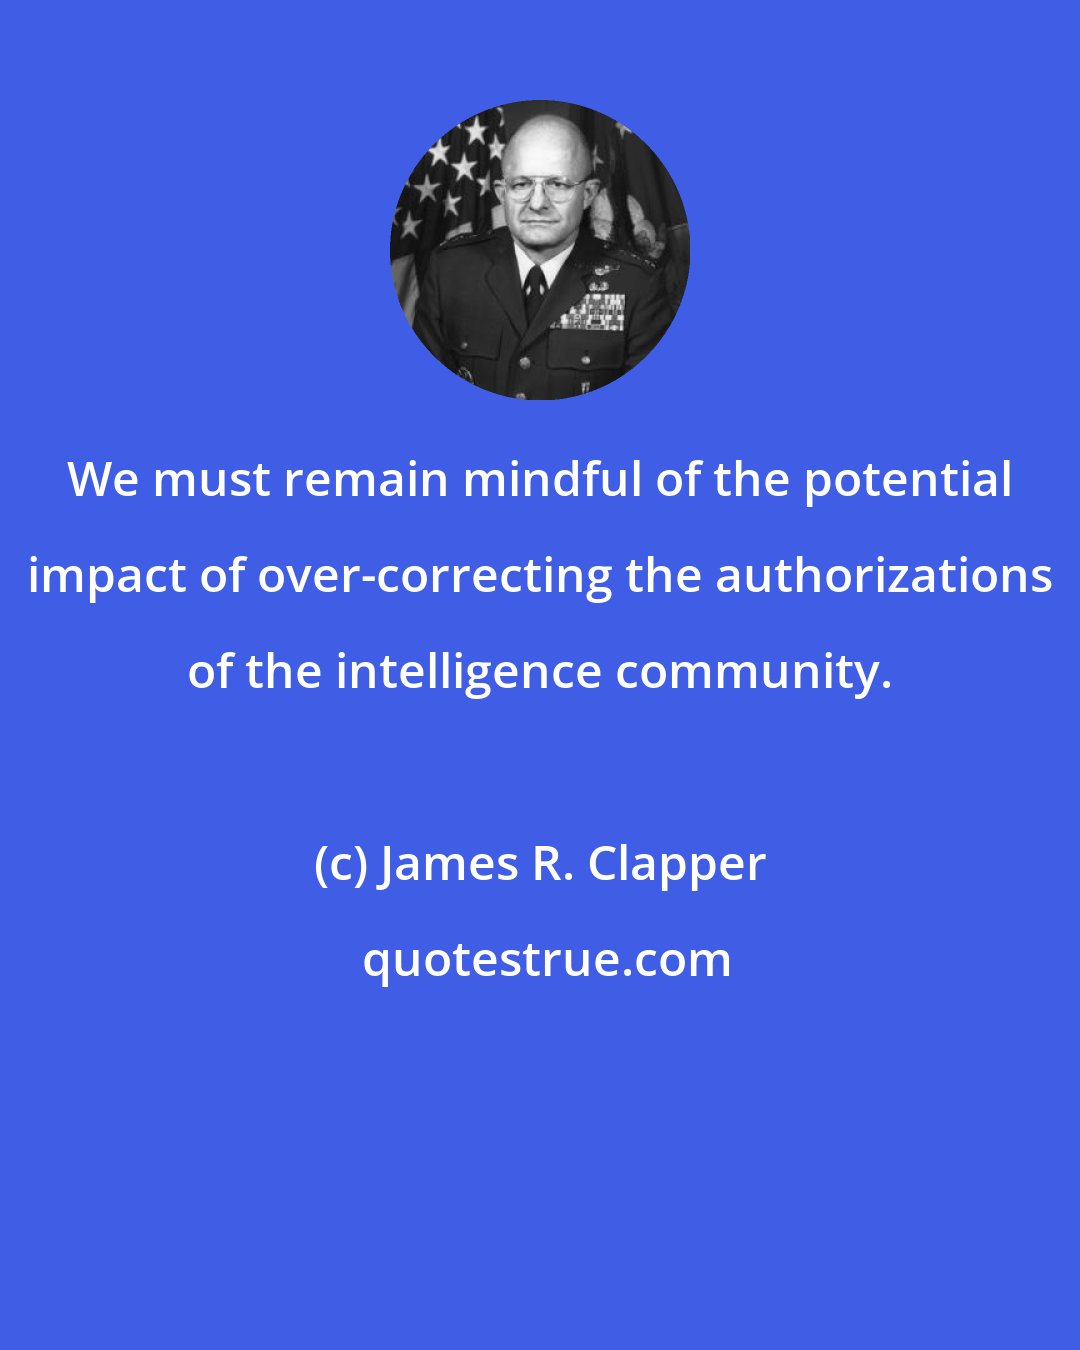 James R. Clapper: We must remain mindful of the potential impact of over-correcting the authorizations of the intelligence community.